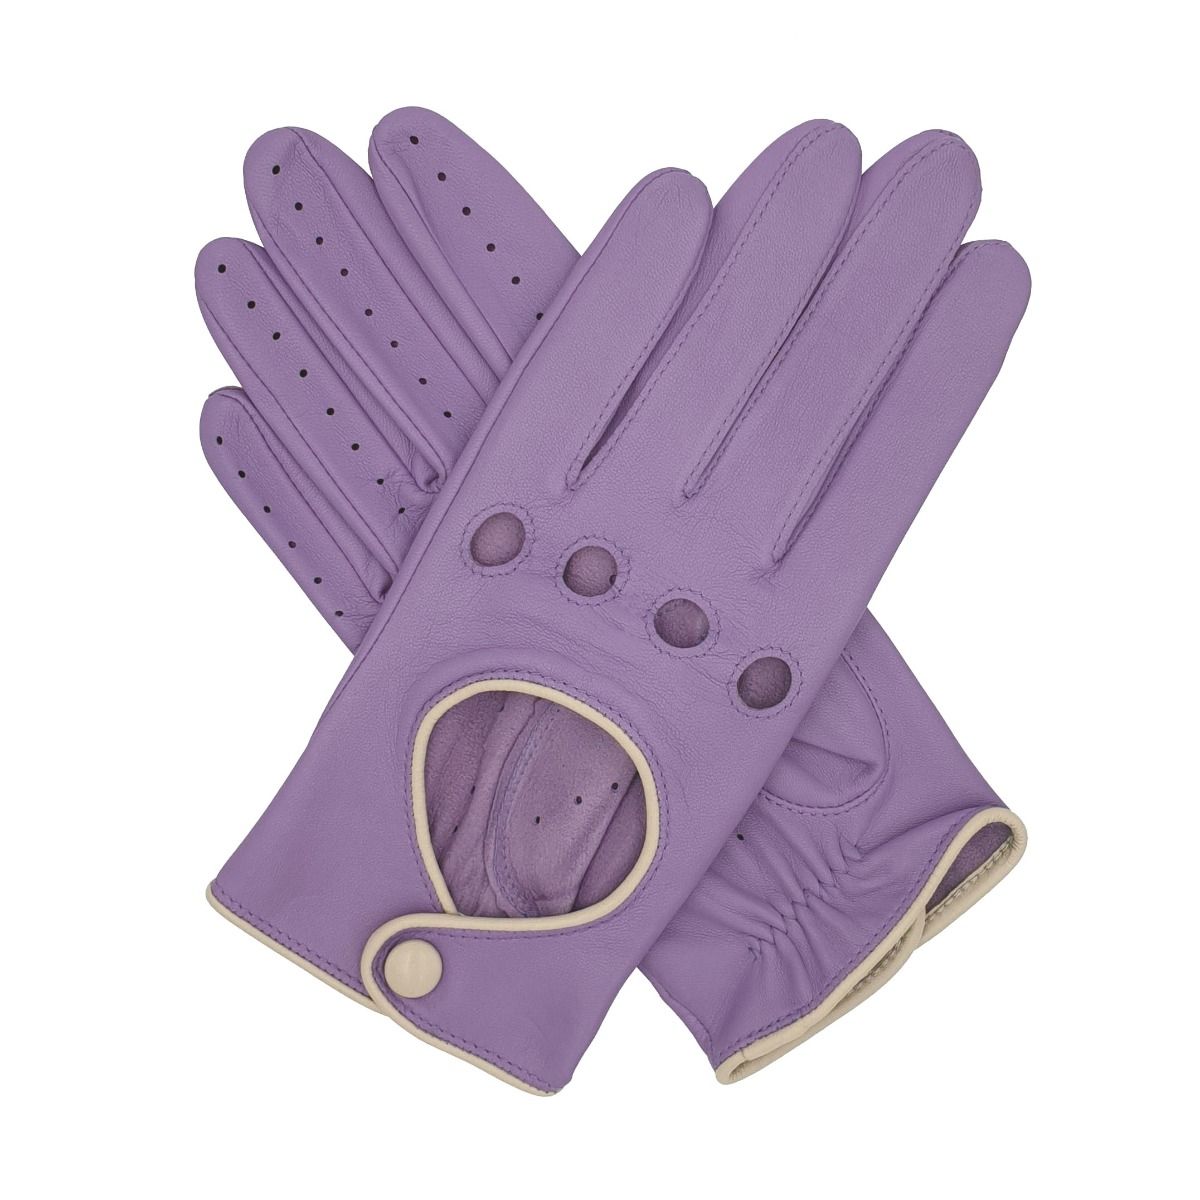 Southcombe Jules Lavender Leather Driving Gloves